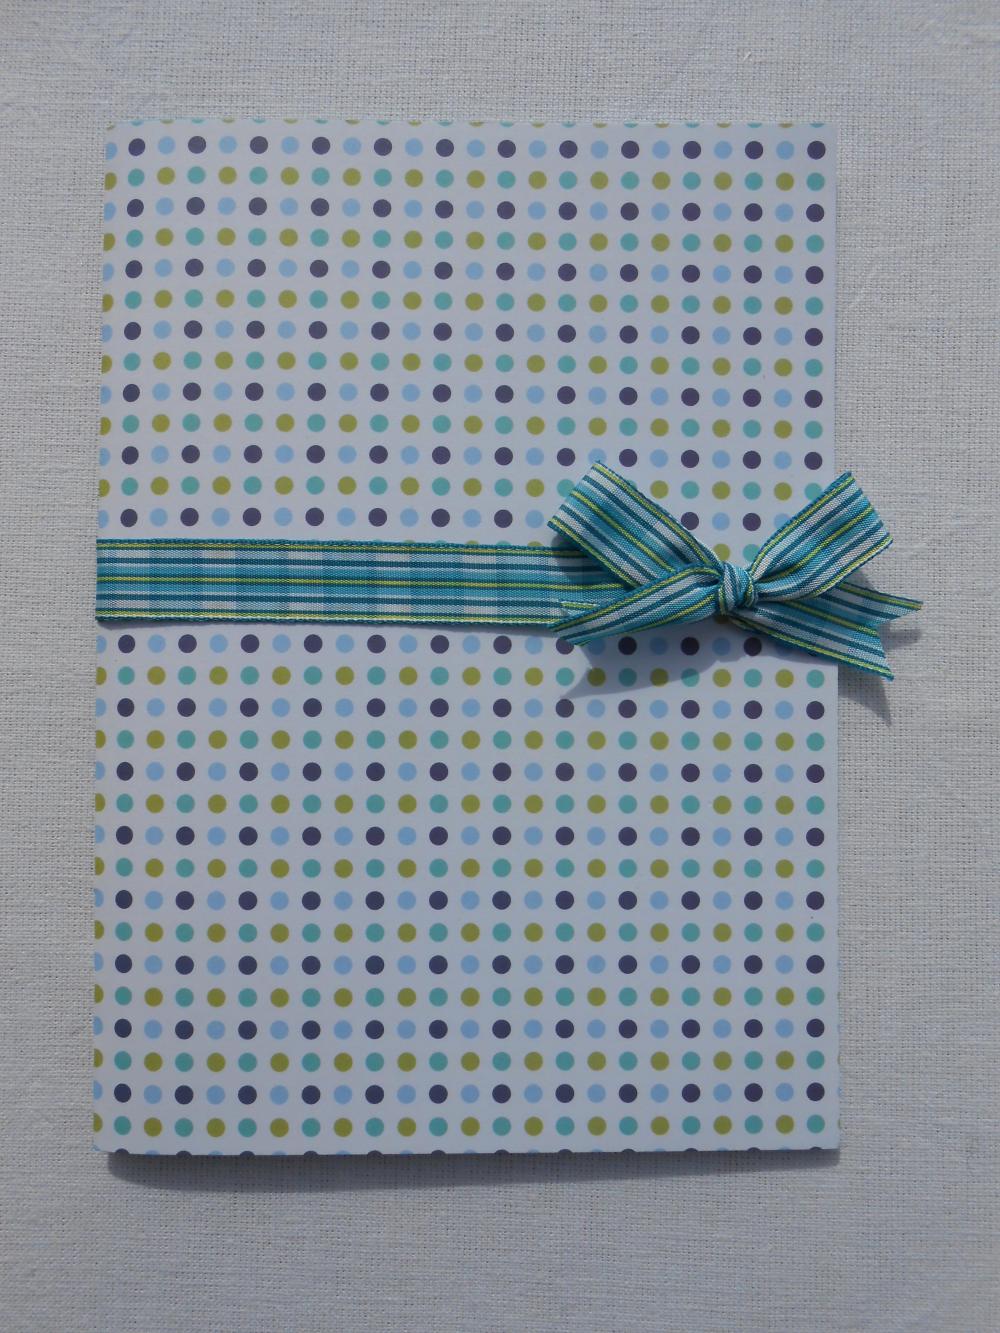 A5 Handstitched Blue Spot Notebook With Tilda Cover And Turquoise Tartan Ribbon